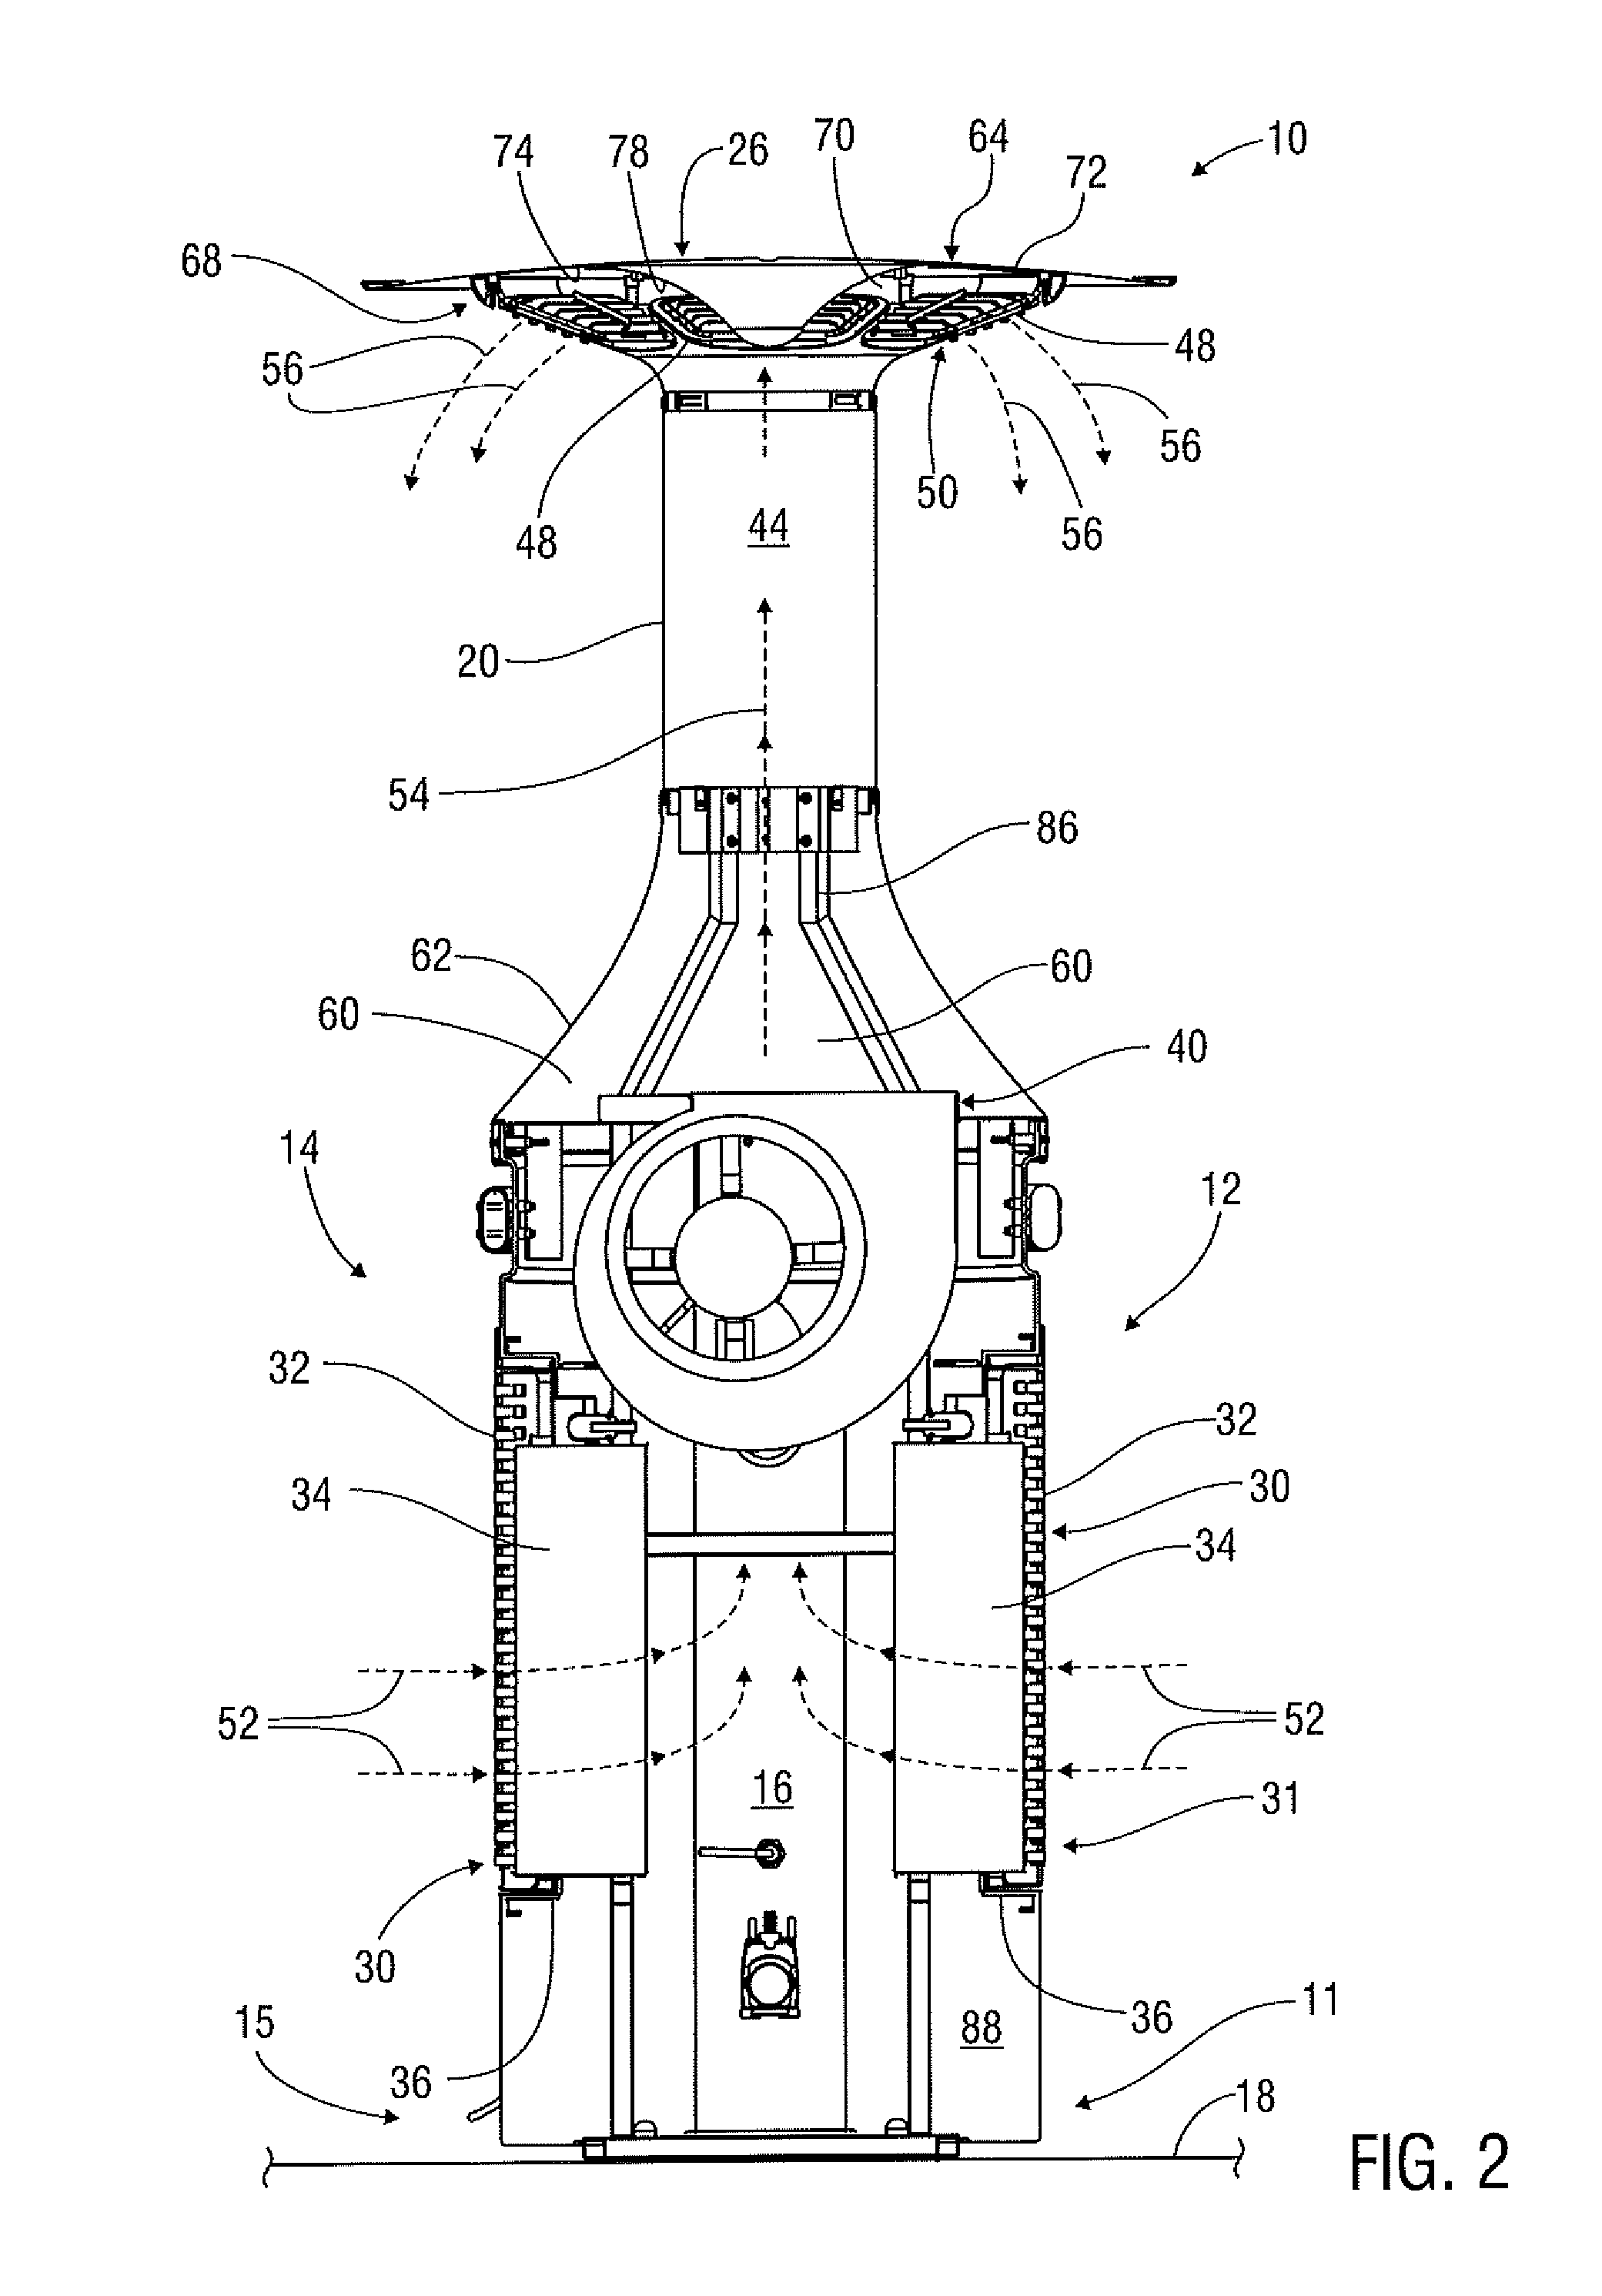 Free-standing evaporative air cooling apparatus